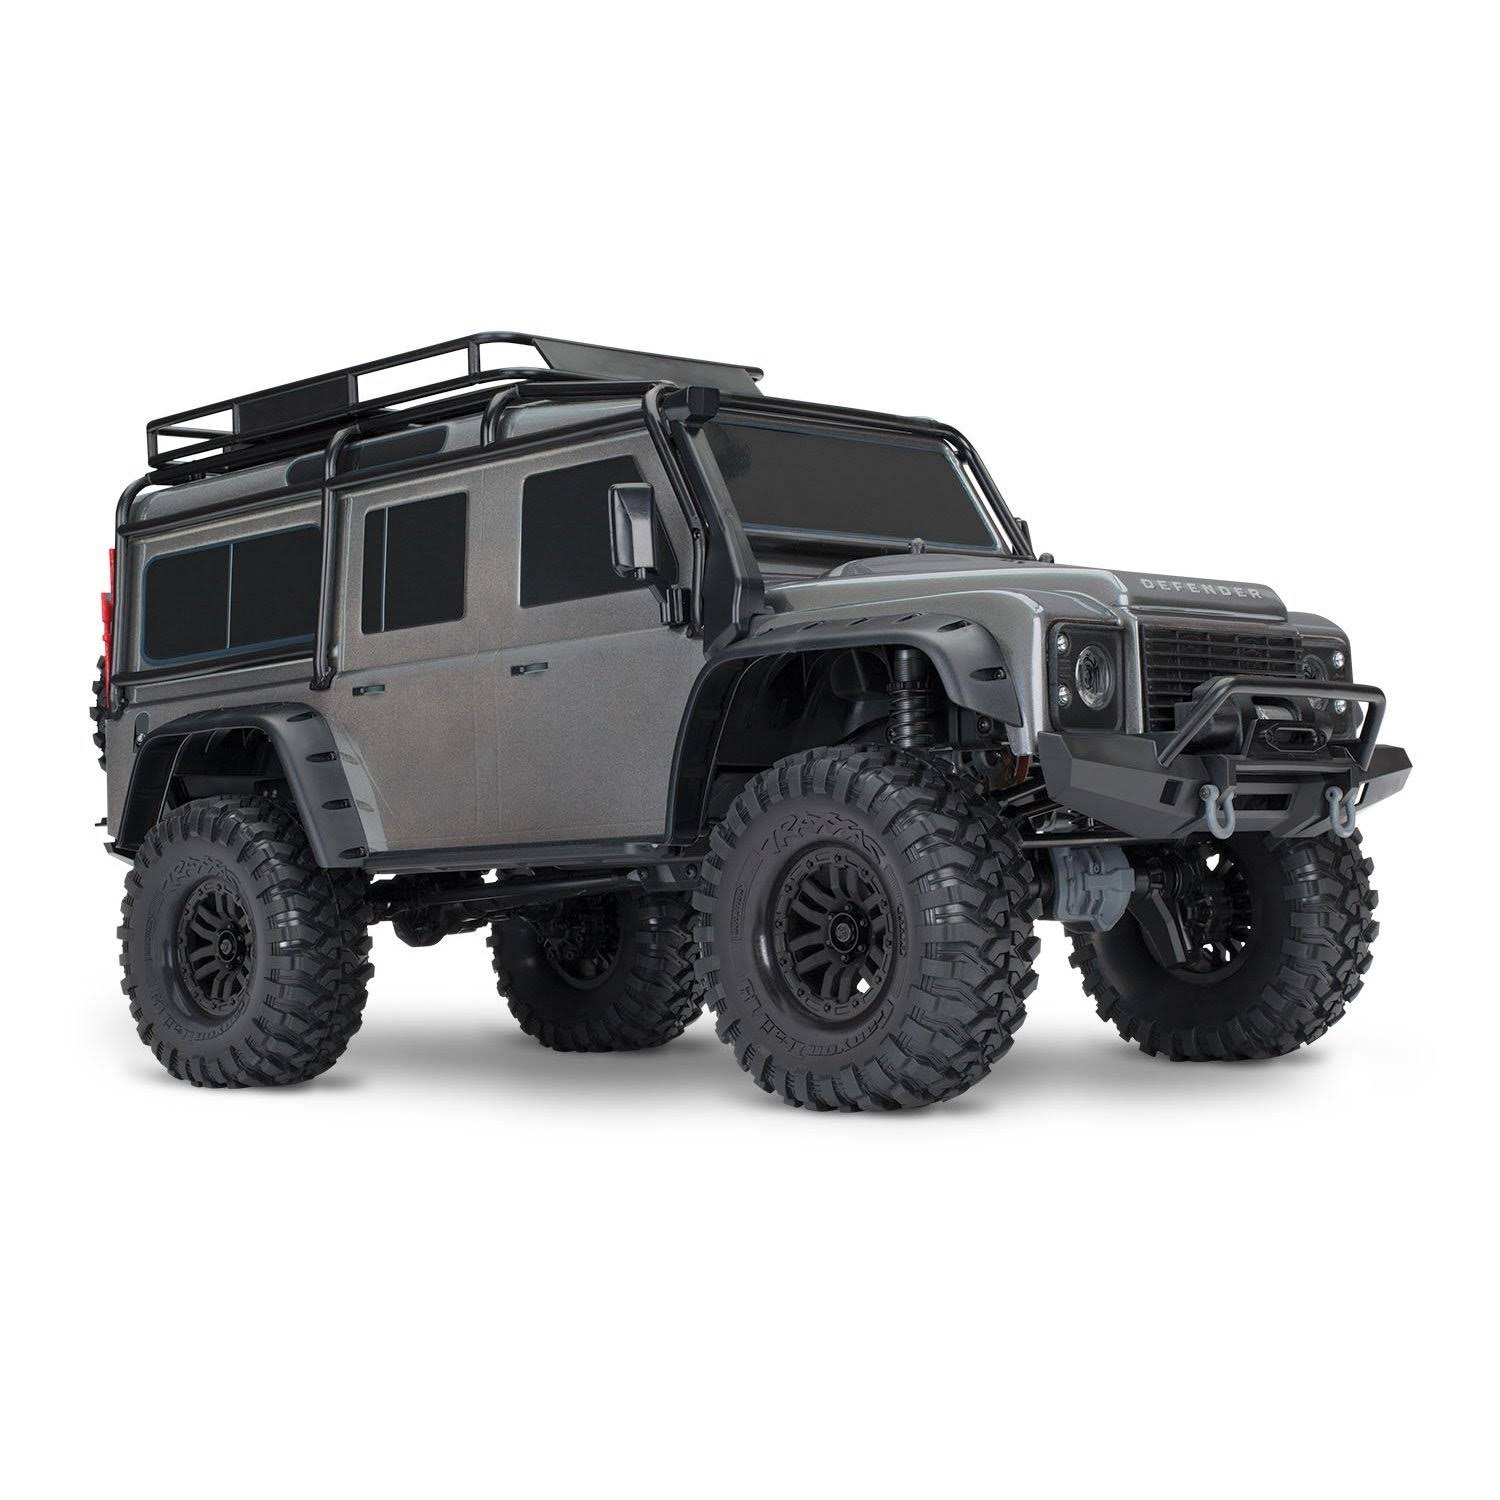 Traxxas TRX-4 Scale and Trail Crawler with Land Rover Defender Body